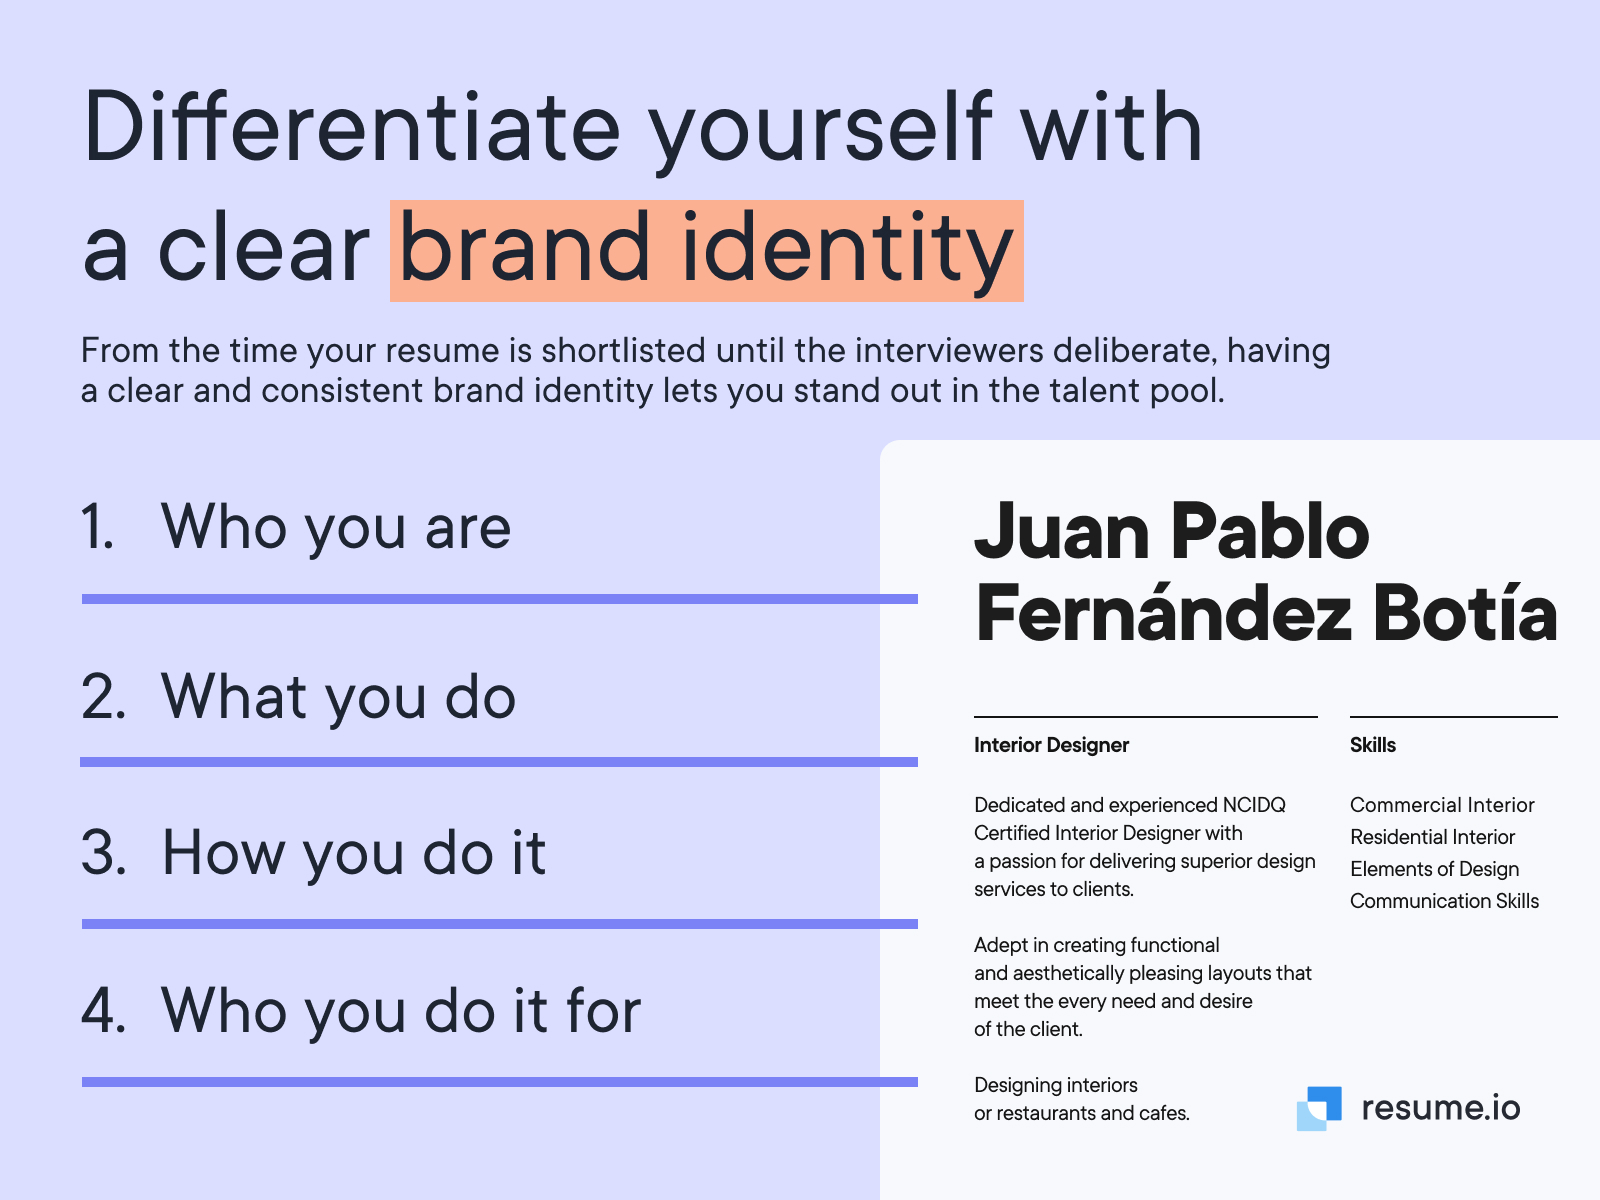 Differentiate yourself with a clear brand identity